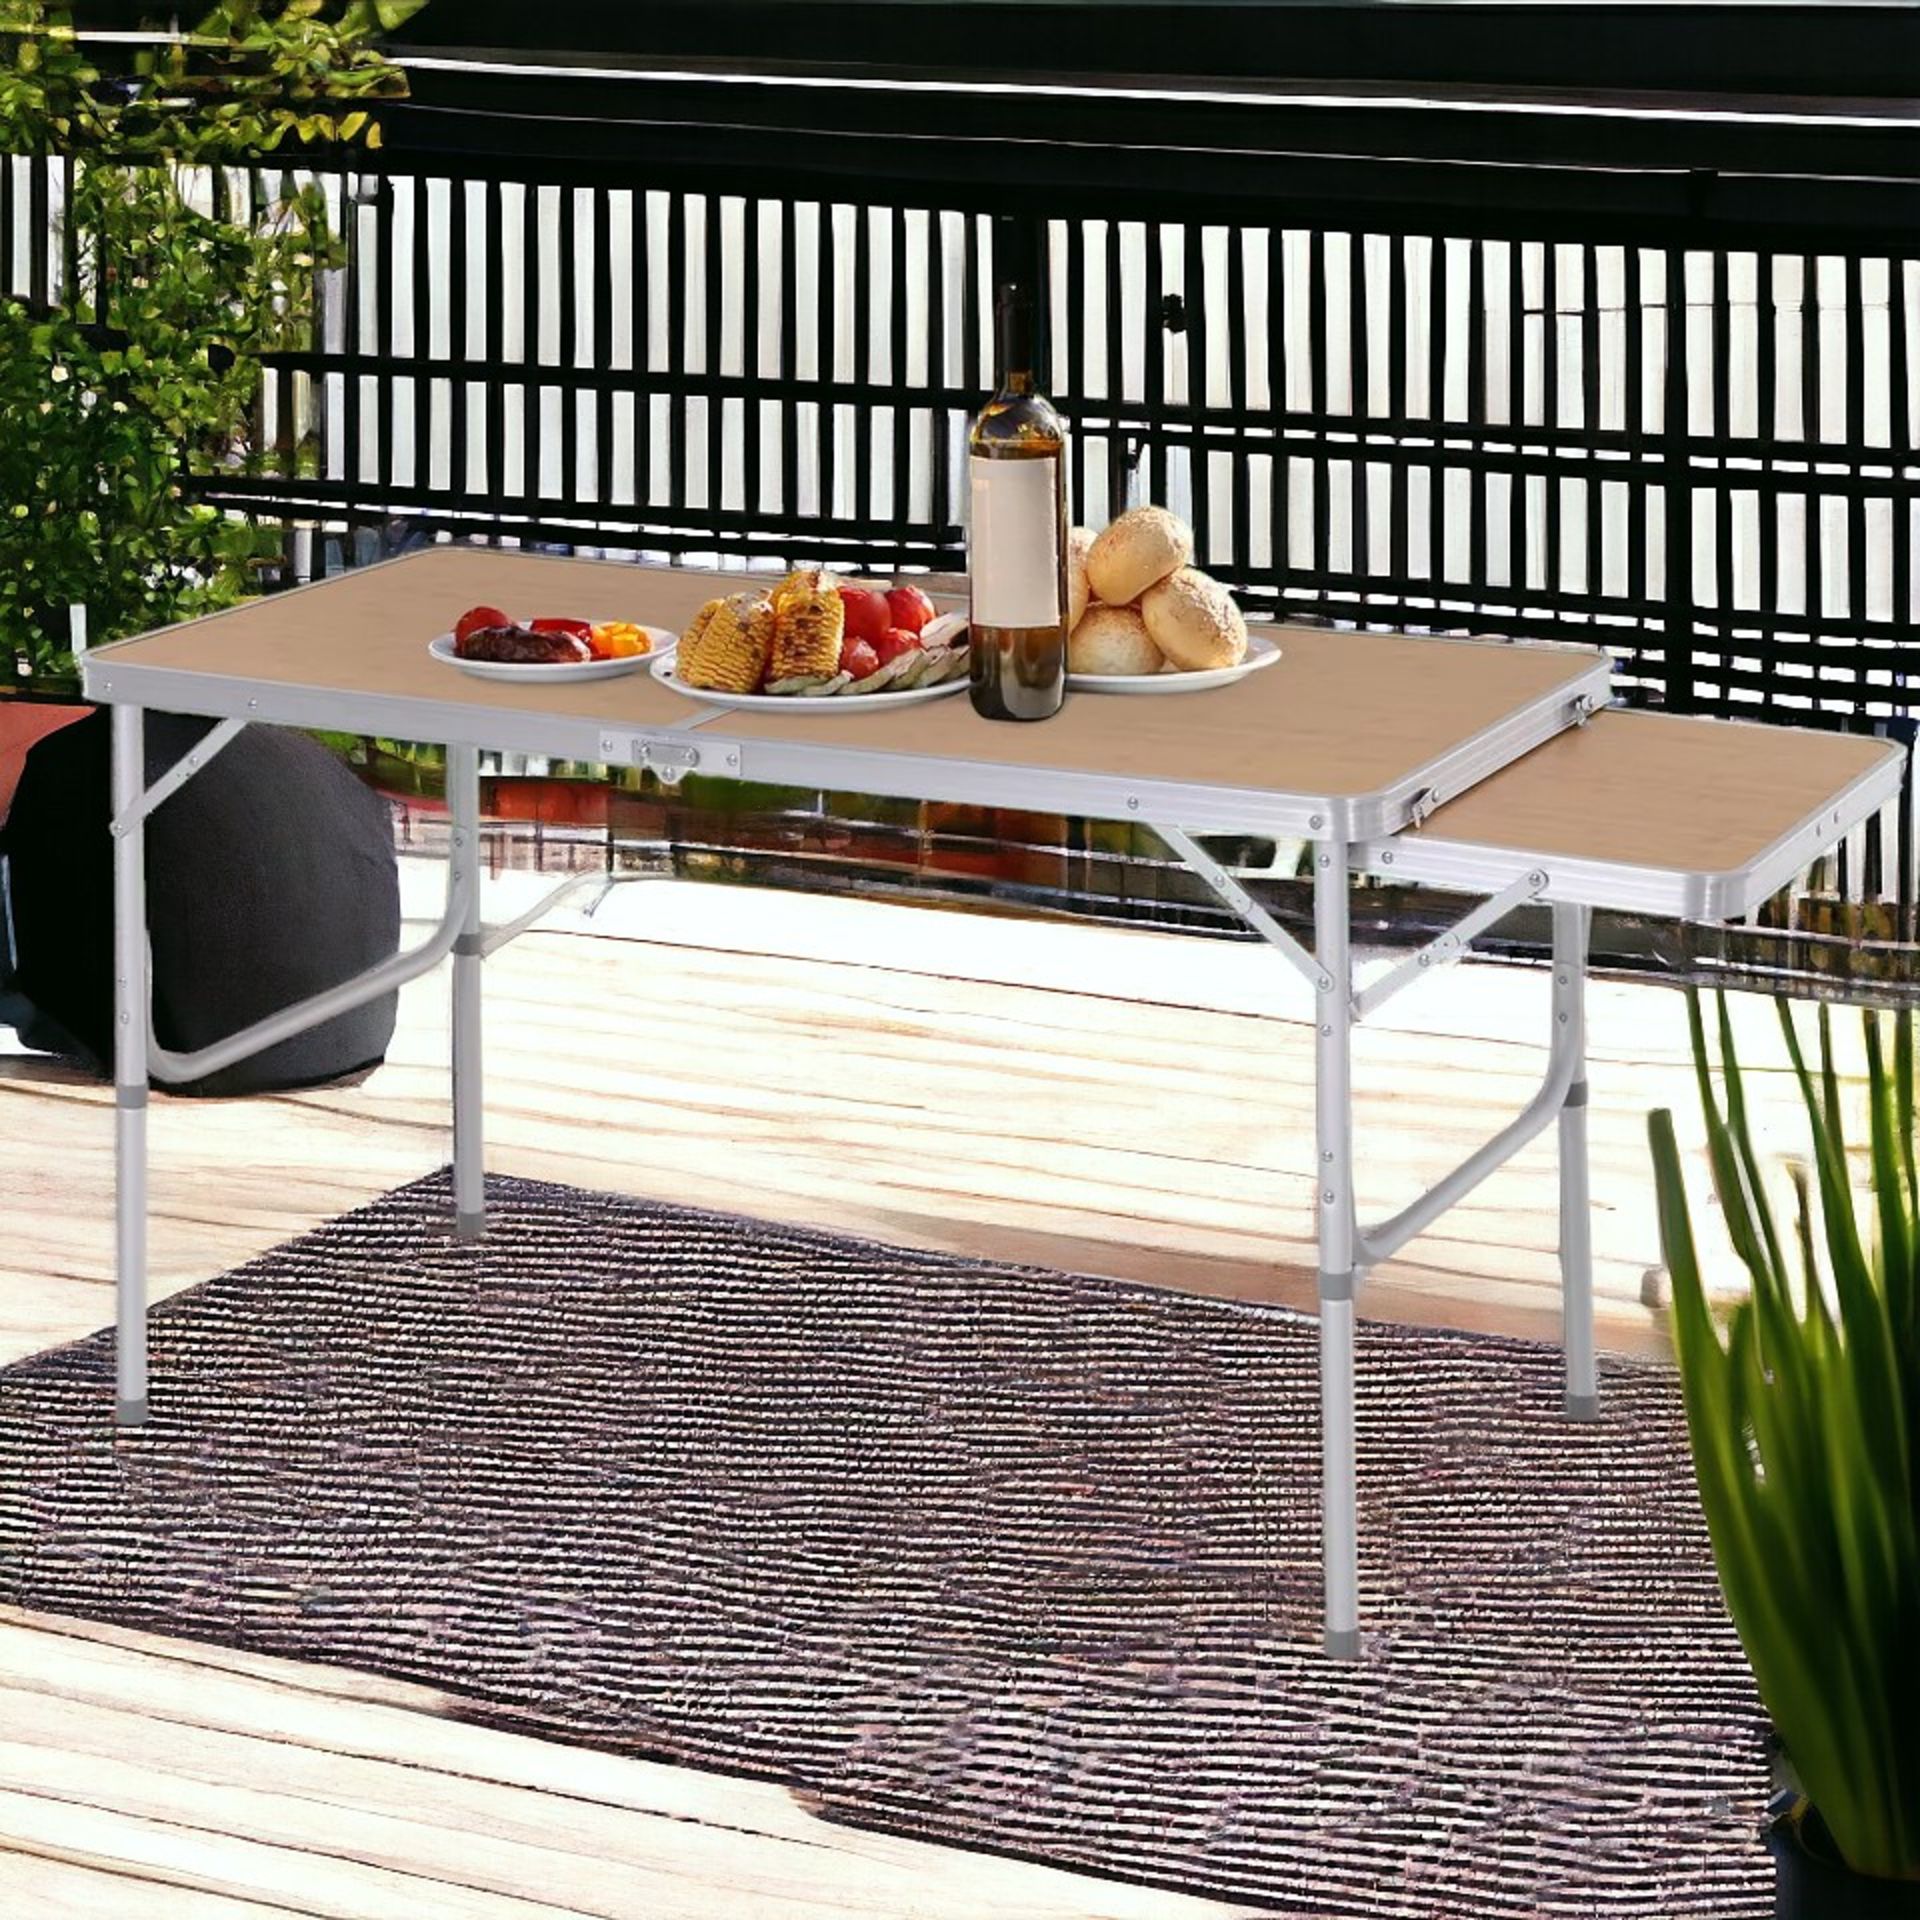 FREE DELIVERY -BRAND NEW 4FT ALUMINIUM PICNIC TABLE W/SIDE DESKTOP OUTDOOR BBQ PARTY - Image 2 of 2